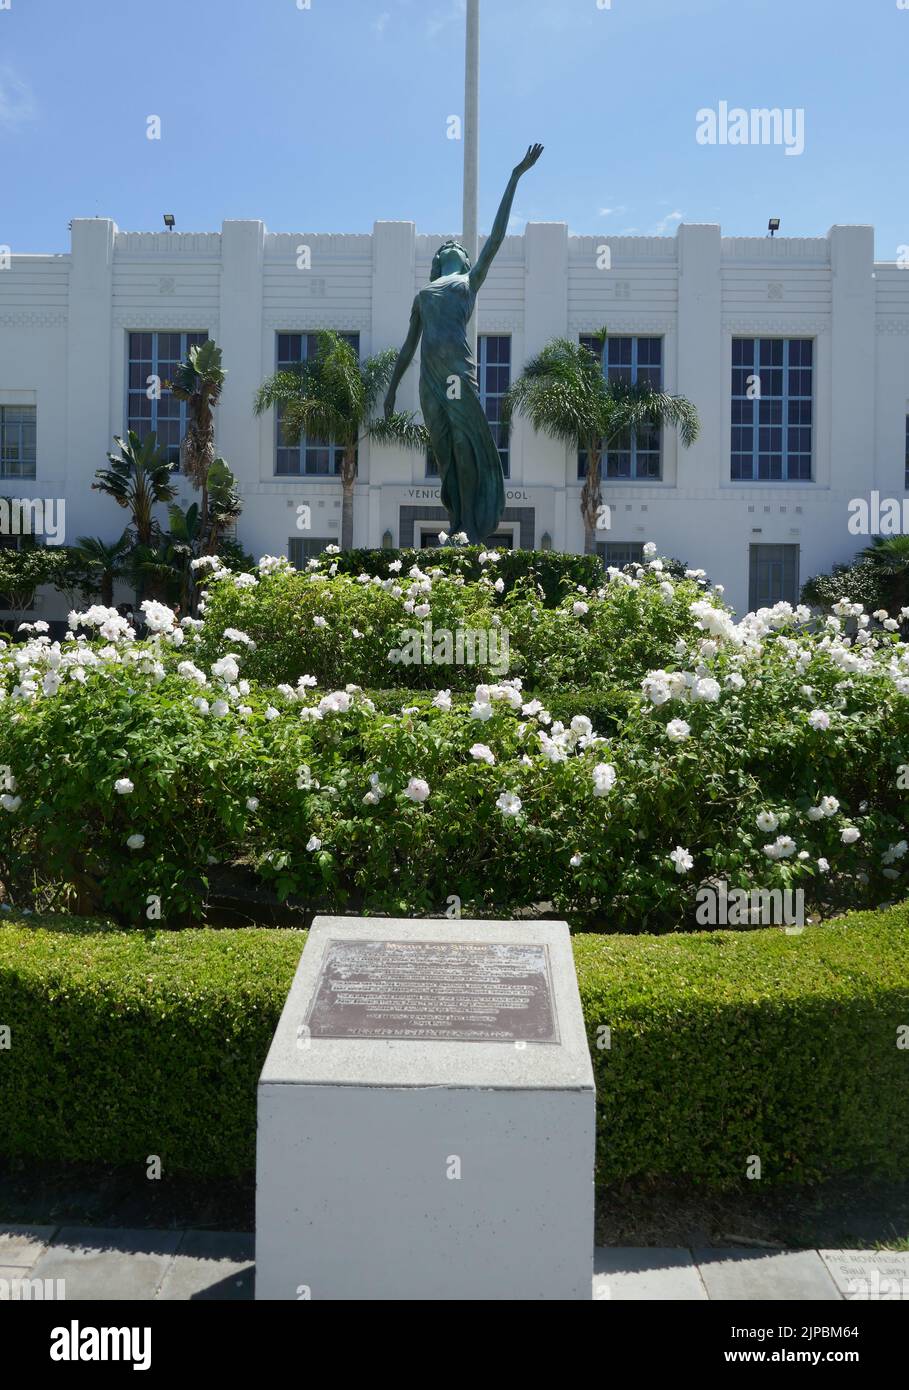 Los Angeles, California, USA 16th August 2022 Actress Myrna Loy Statue at Venice High School where Olivia Newton-John and John Travolta filmed the Movie Grease, Rydell High School, Singer Britney Spears filmed Baby One More Time Video, American History X and Nightmare on Elm Street 4 movies filmed and more at Venice High School at 13000 Venice Blvd on August 16, 2022  in Los Angeles, California, USA. Photo by Barry King/Alamy Stock Photo Stock Photo